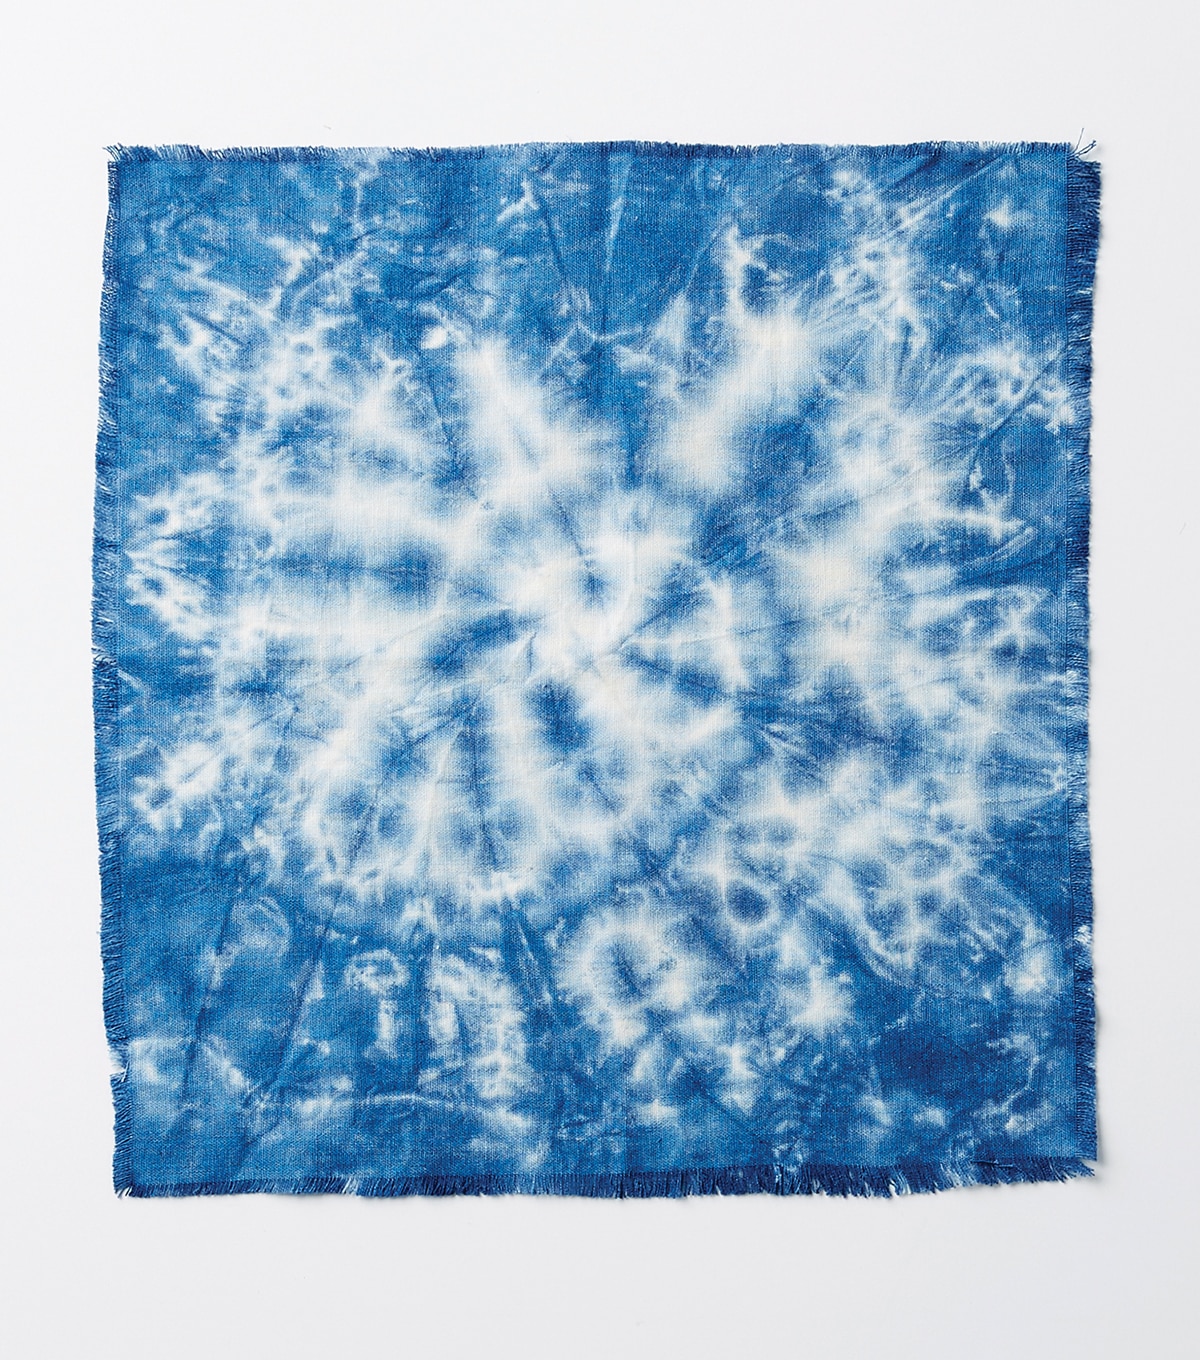 How To Make Shibori Dying Projects | JOANN